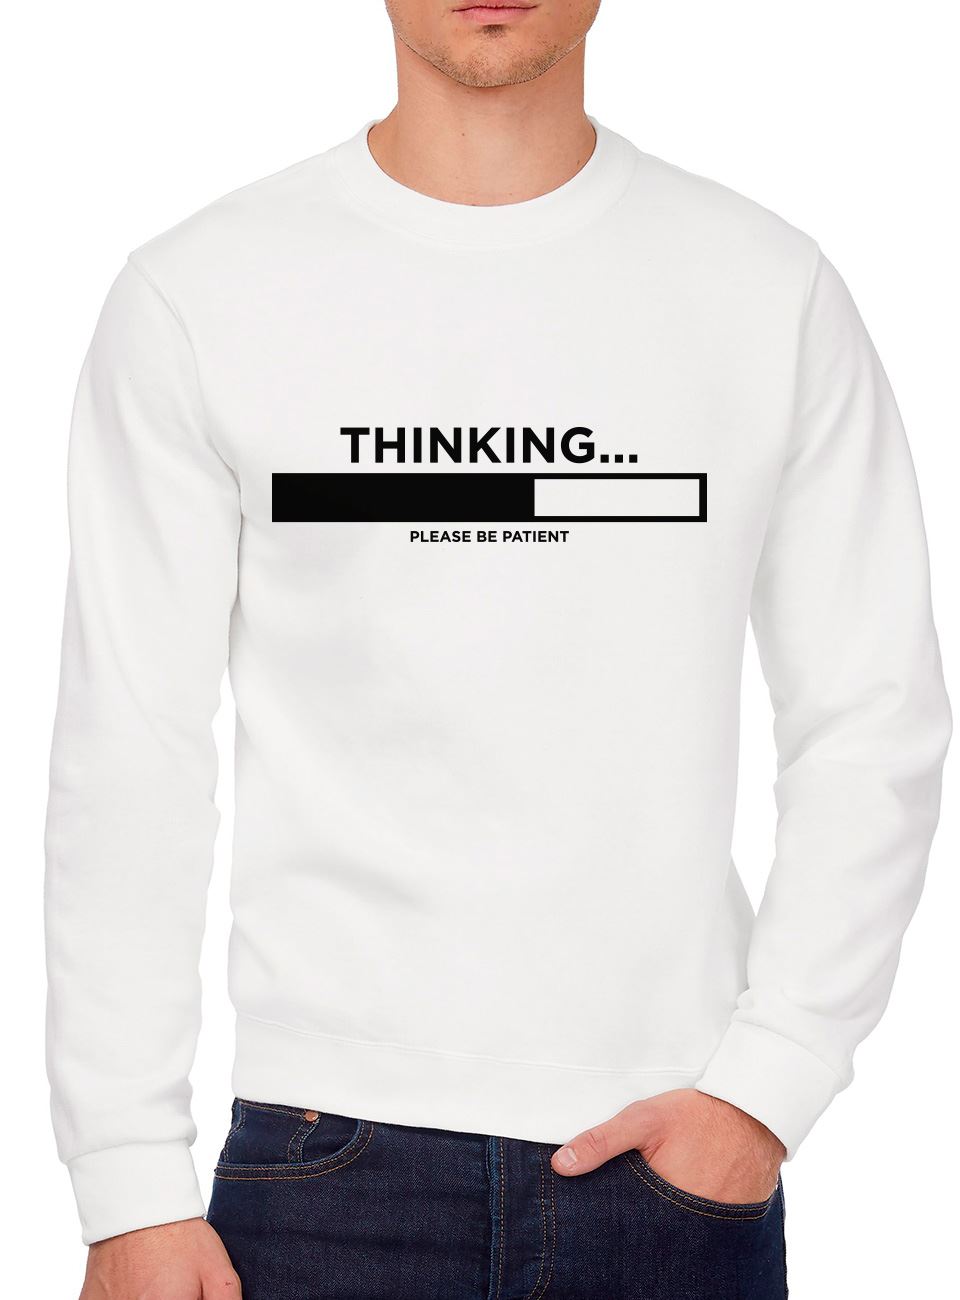 Thinking ... Please Be Patient - Youth & Mens Sweatshirt